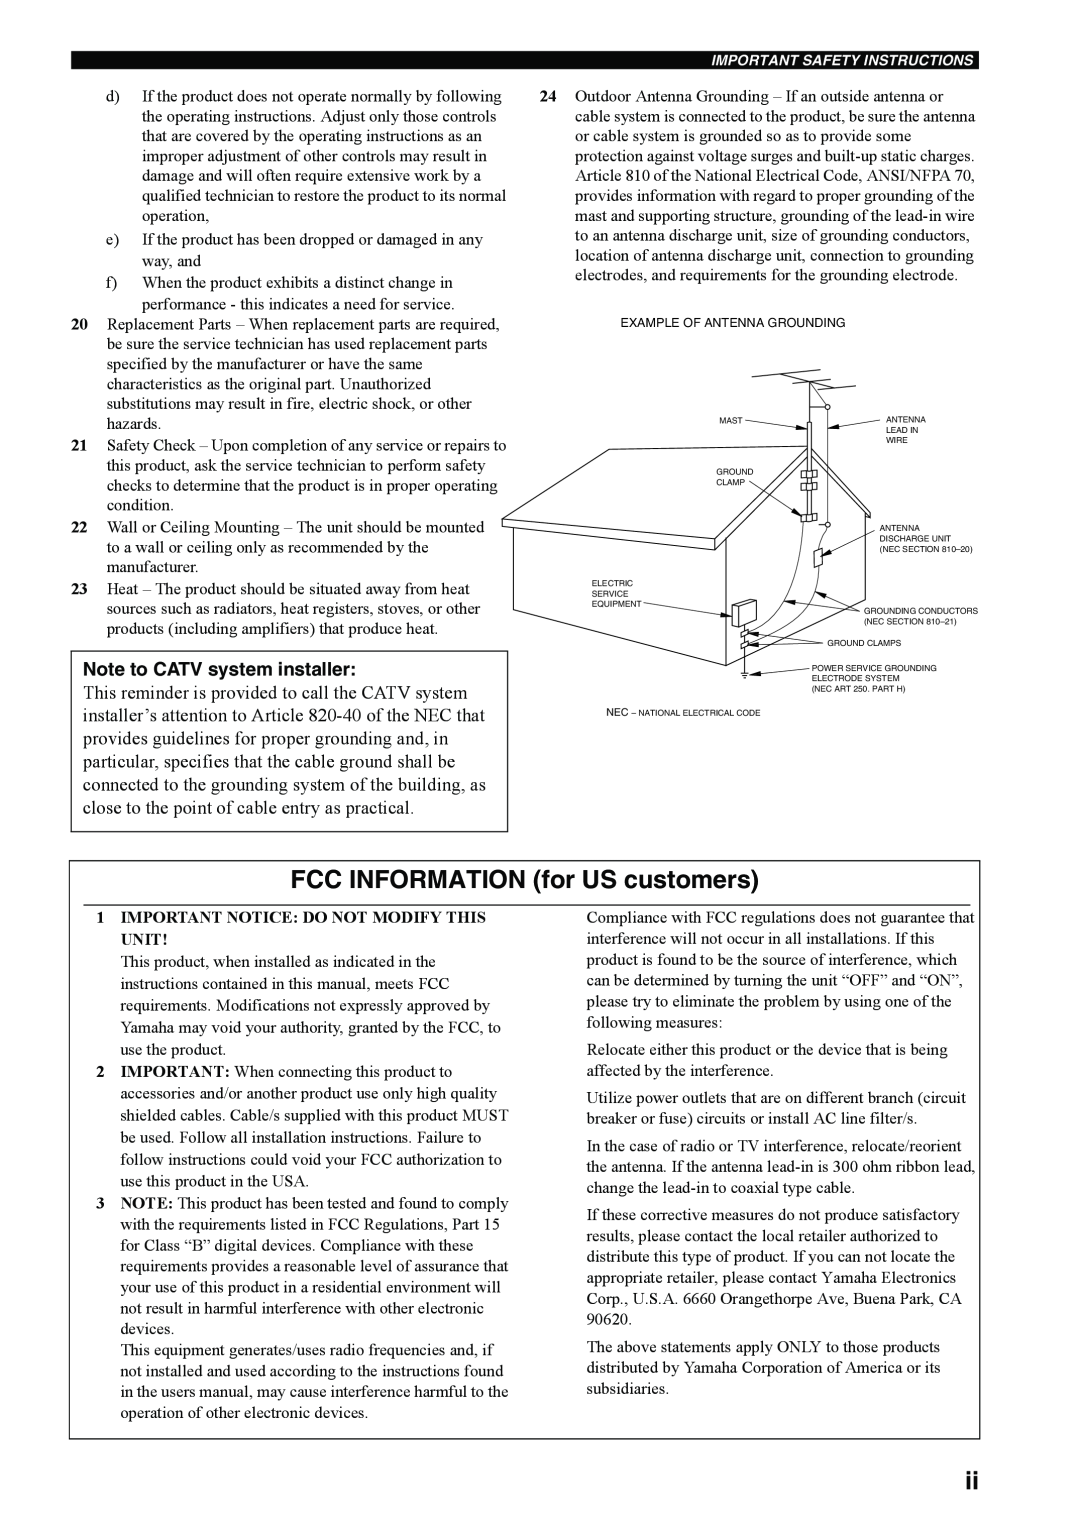 Yamaha RX-V4600 FCC INFORMATION for US customers, Note to CATV system installer, Important Notice Do Not Modify This Unit 